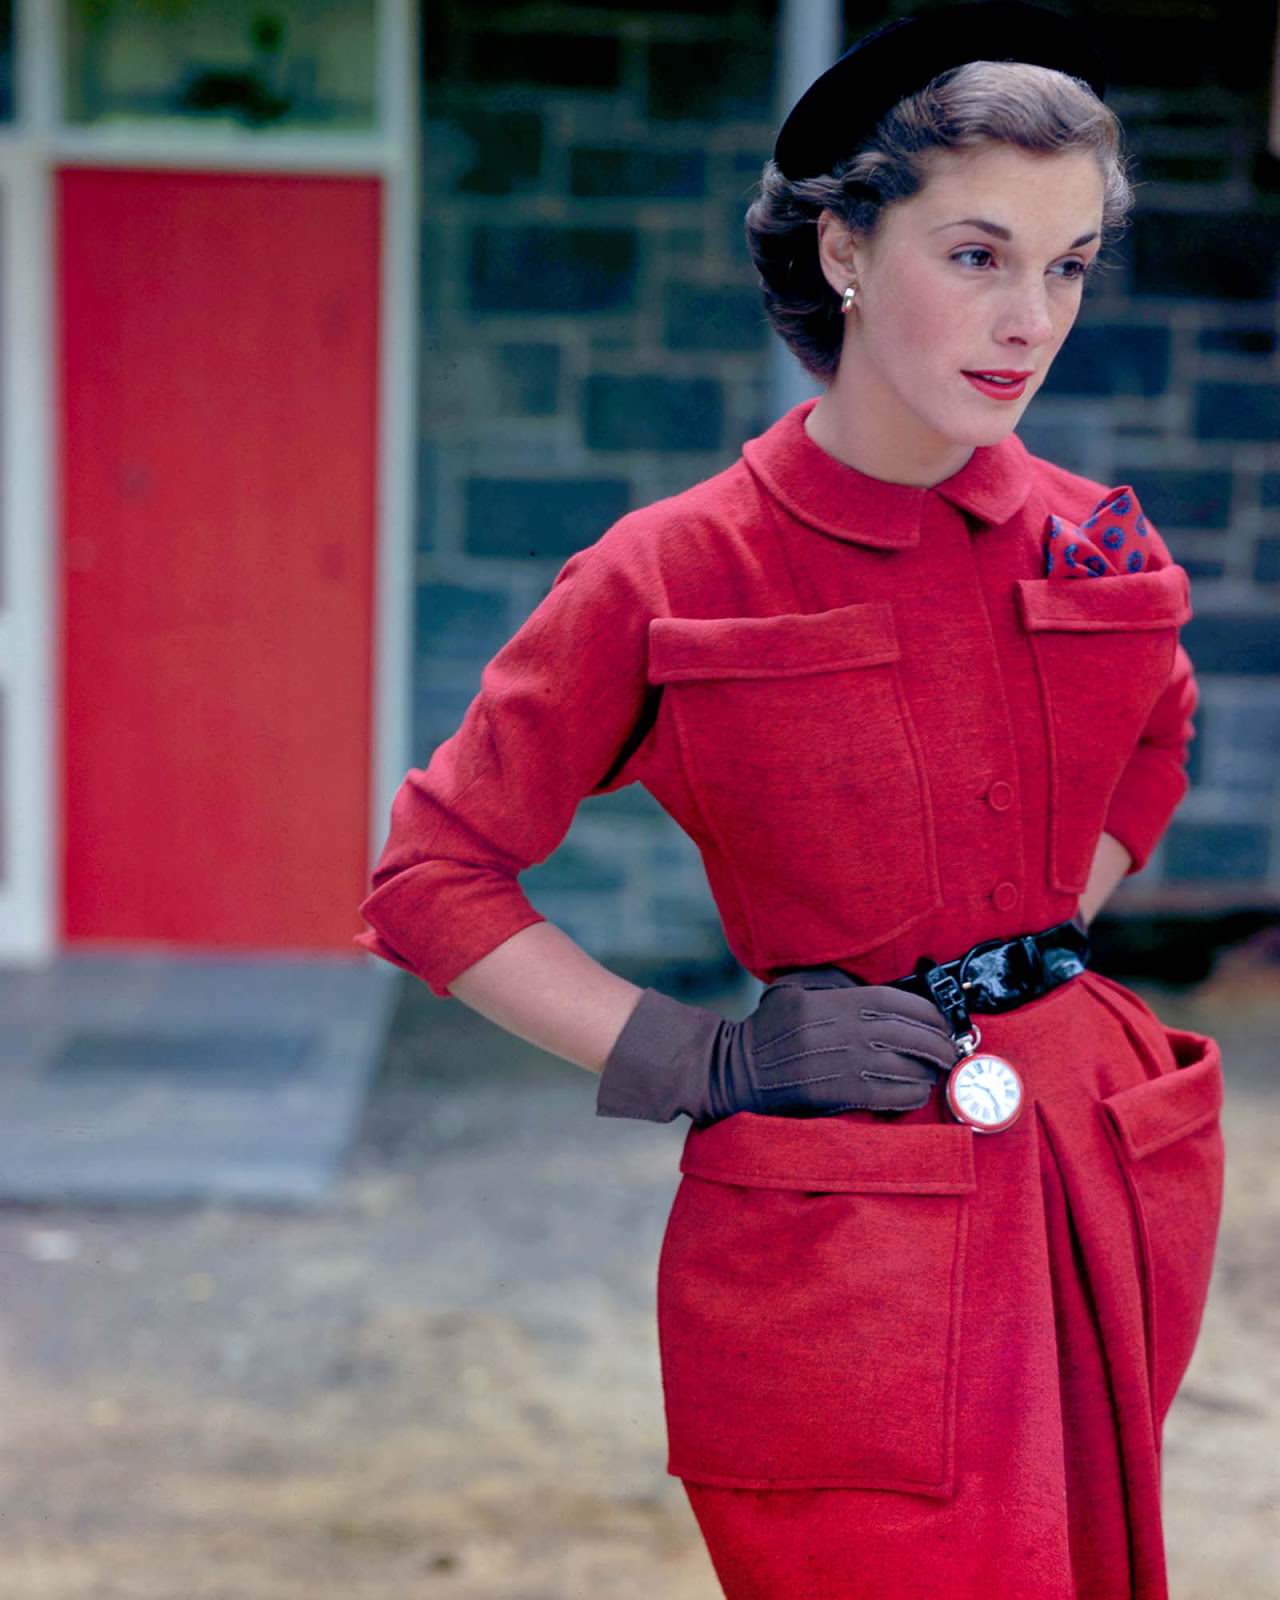 Spectacular Fashion Photography By Genevieve Naylor From The 1950s